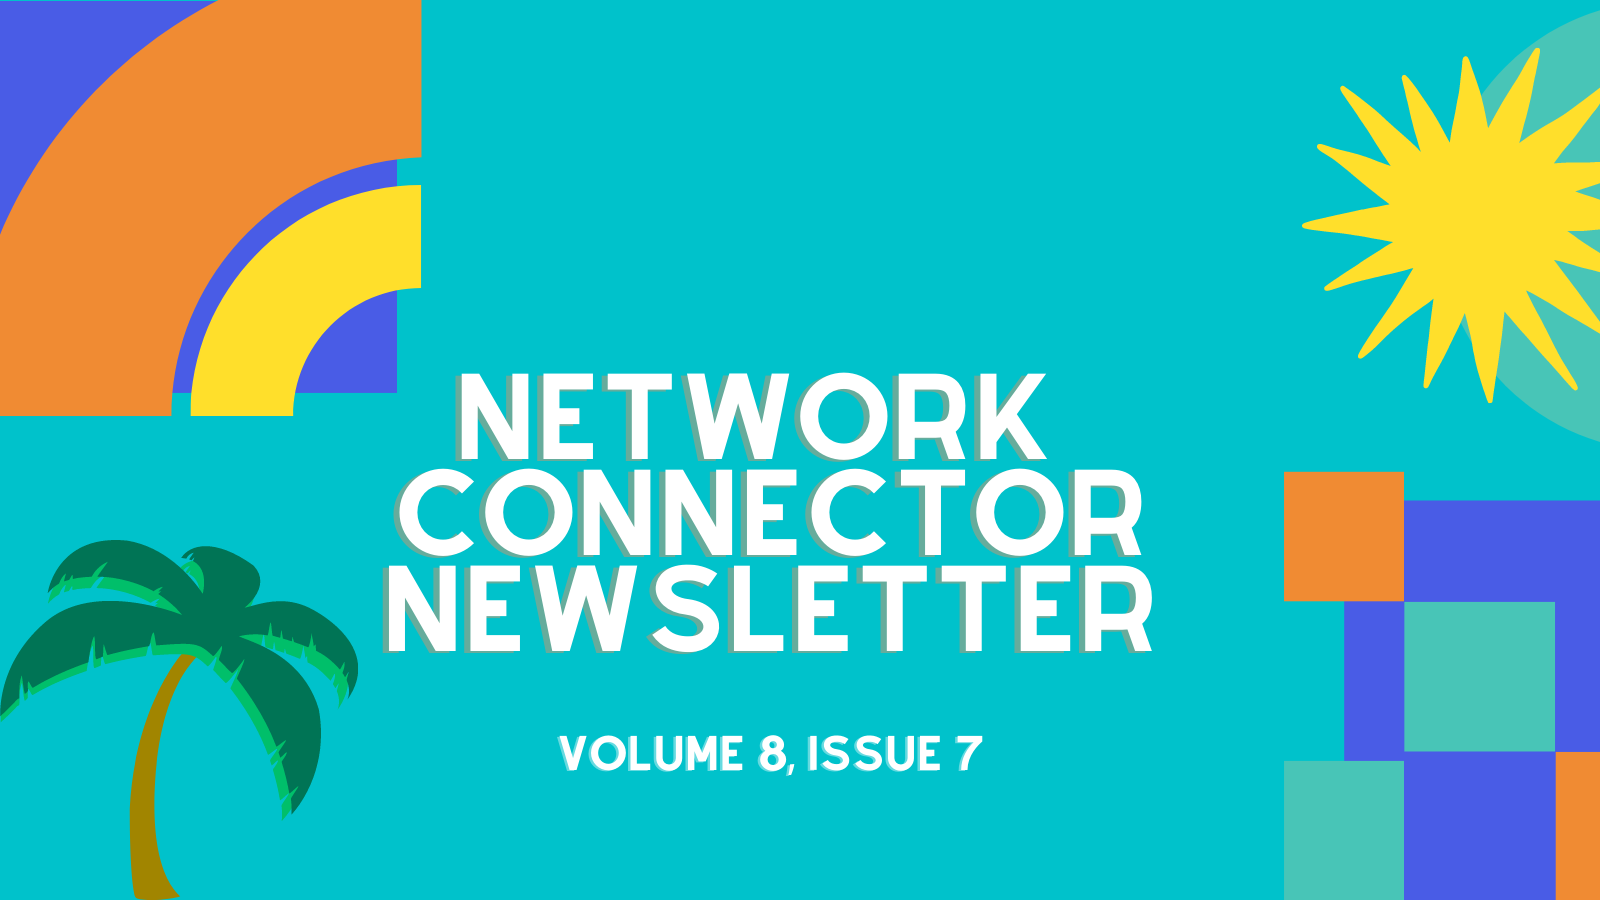 Network Connector Volume 8, Issue 7